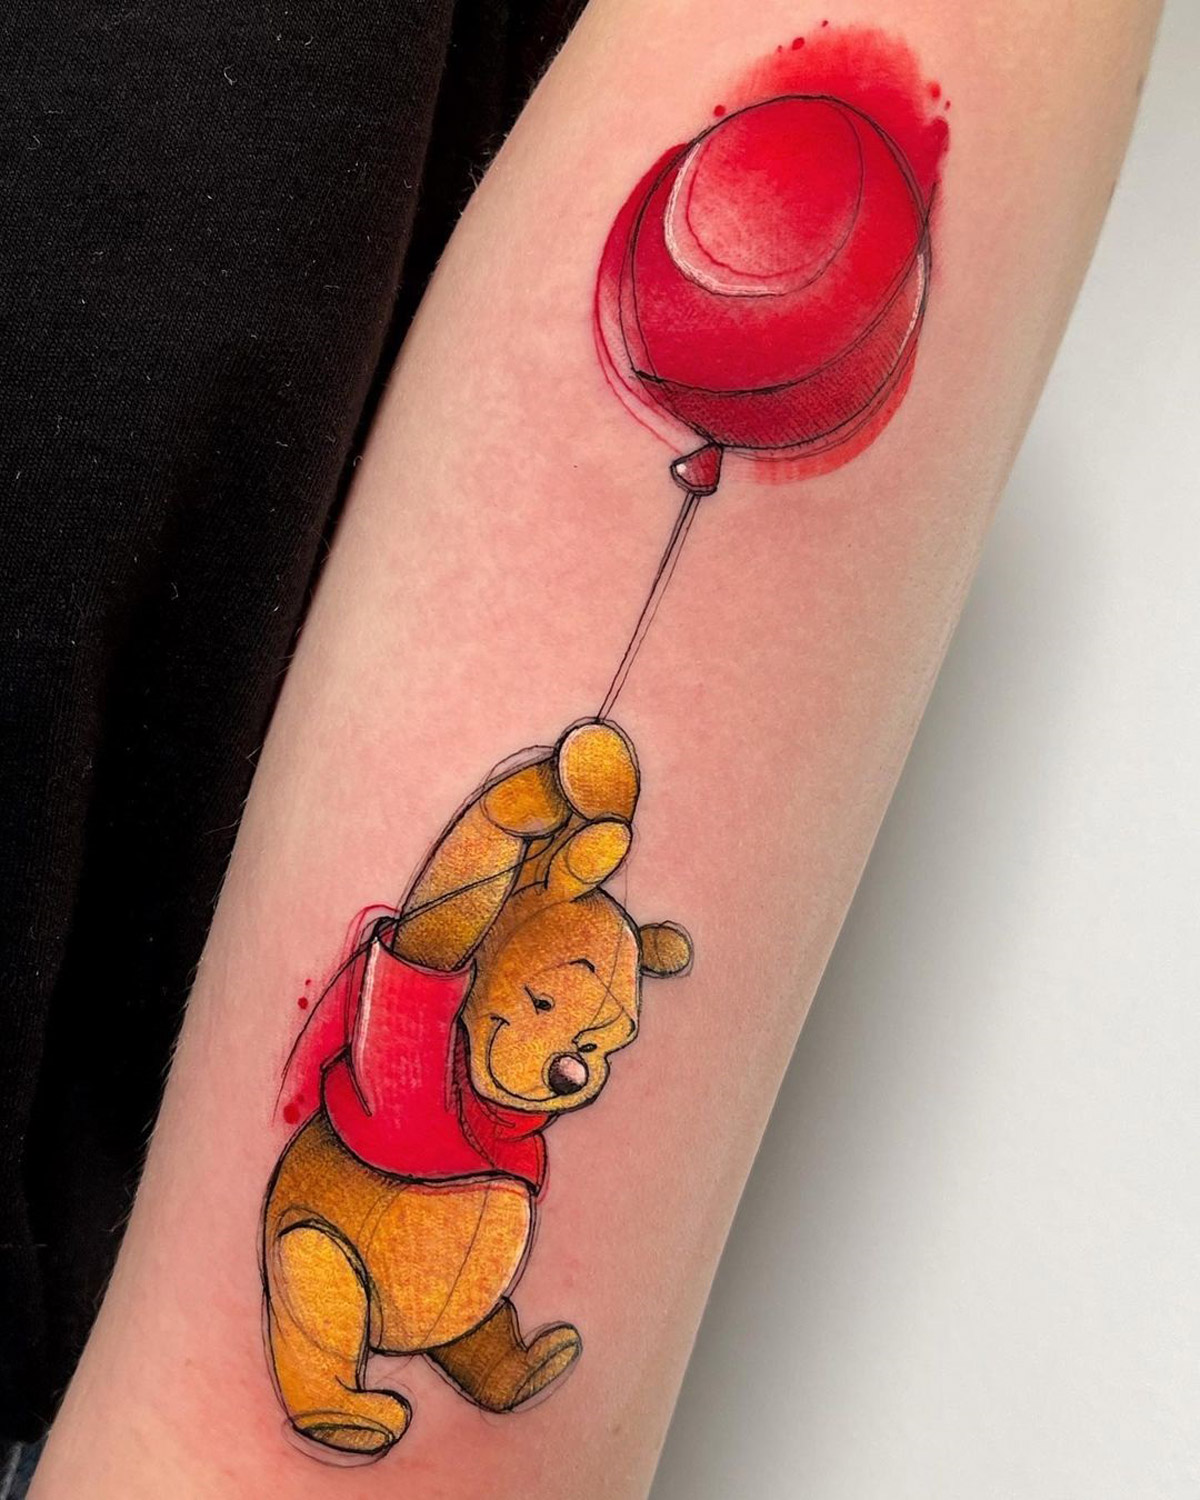 Best of Whinnie the pooh tattoo